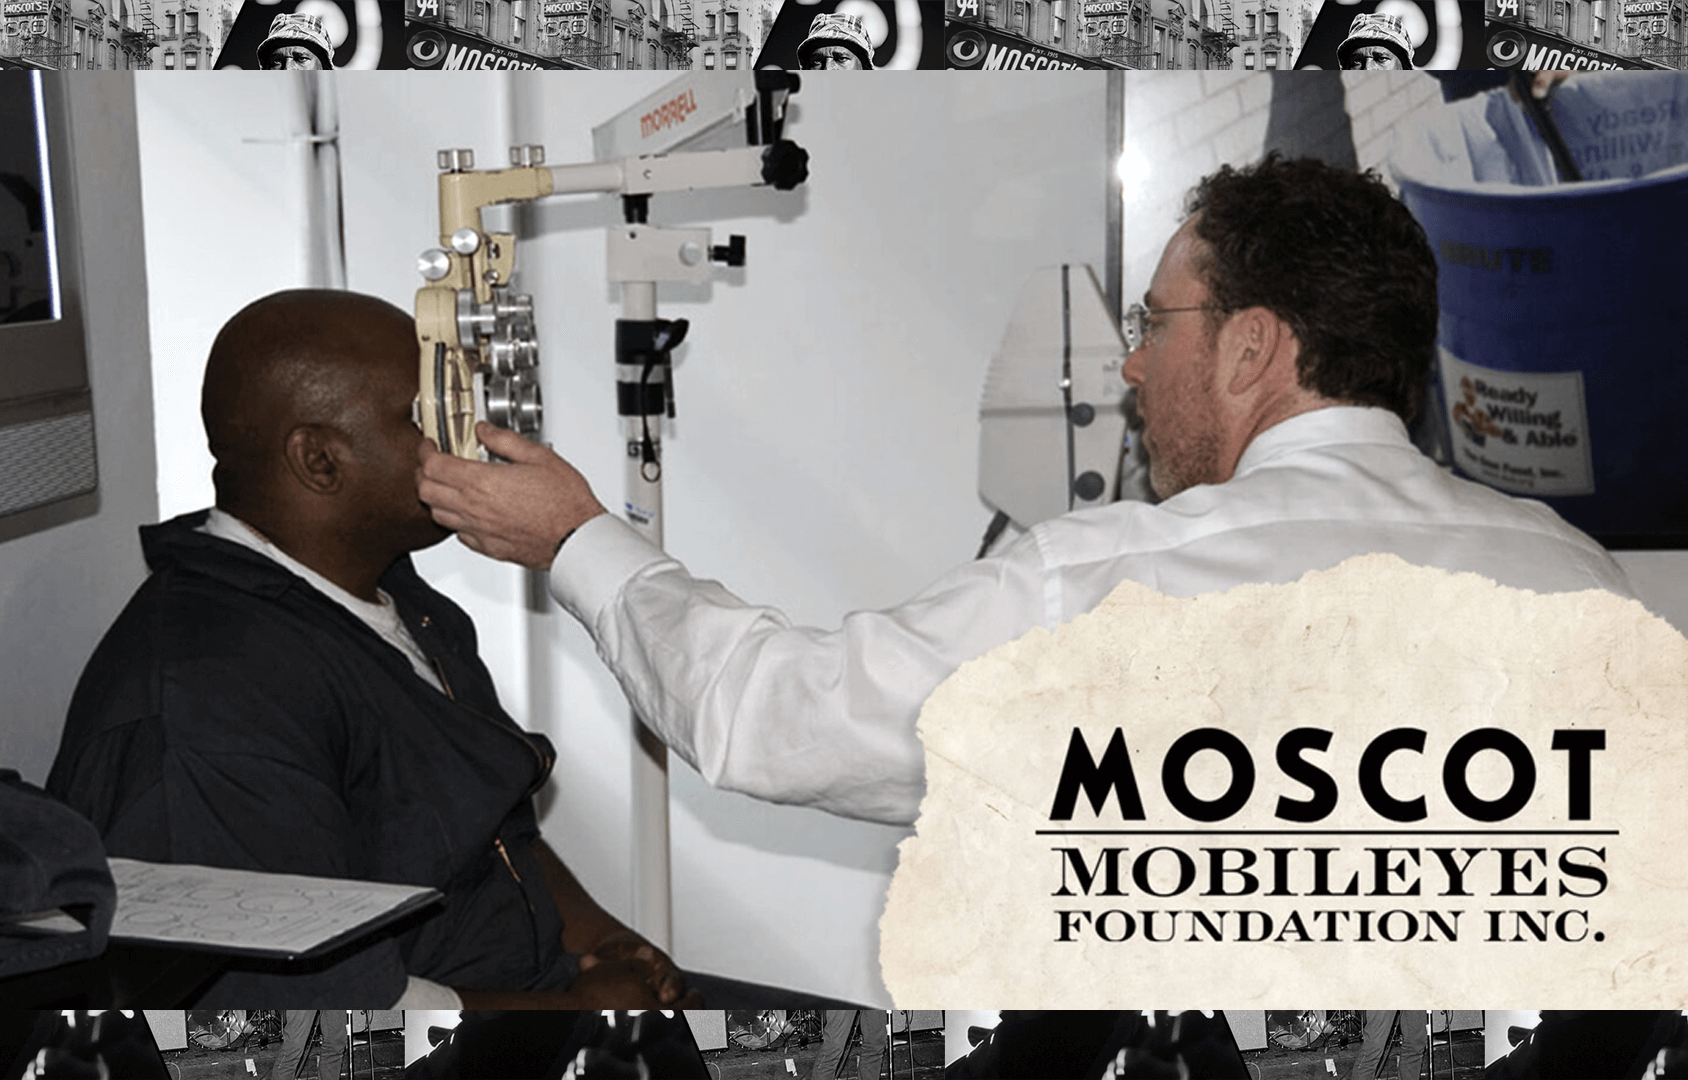 MOSCOT MOBILEYES FOUNDATION